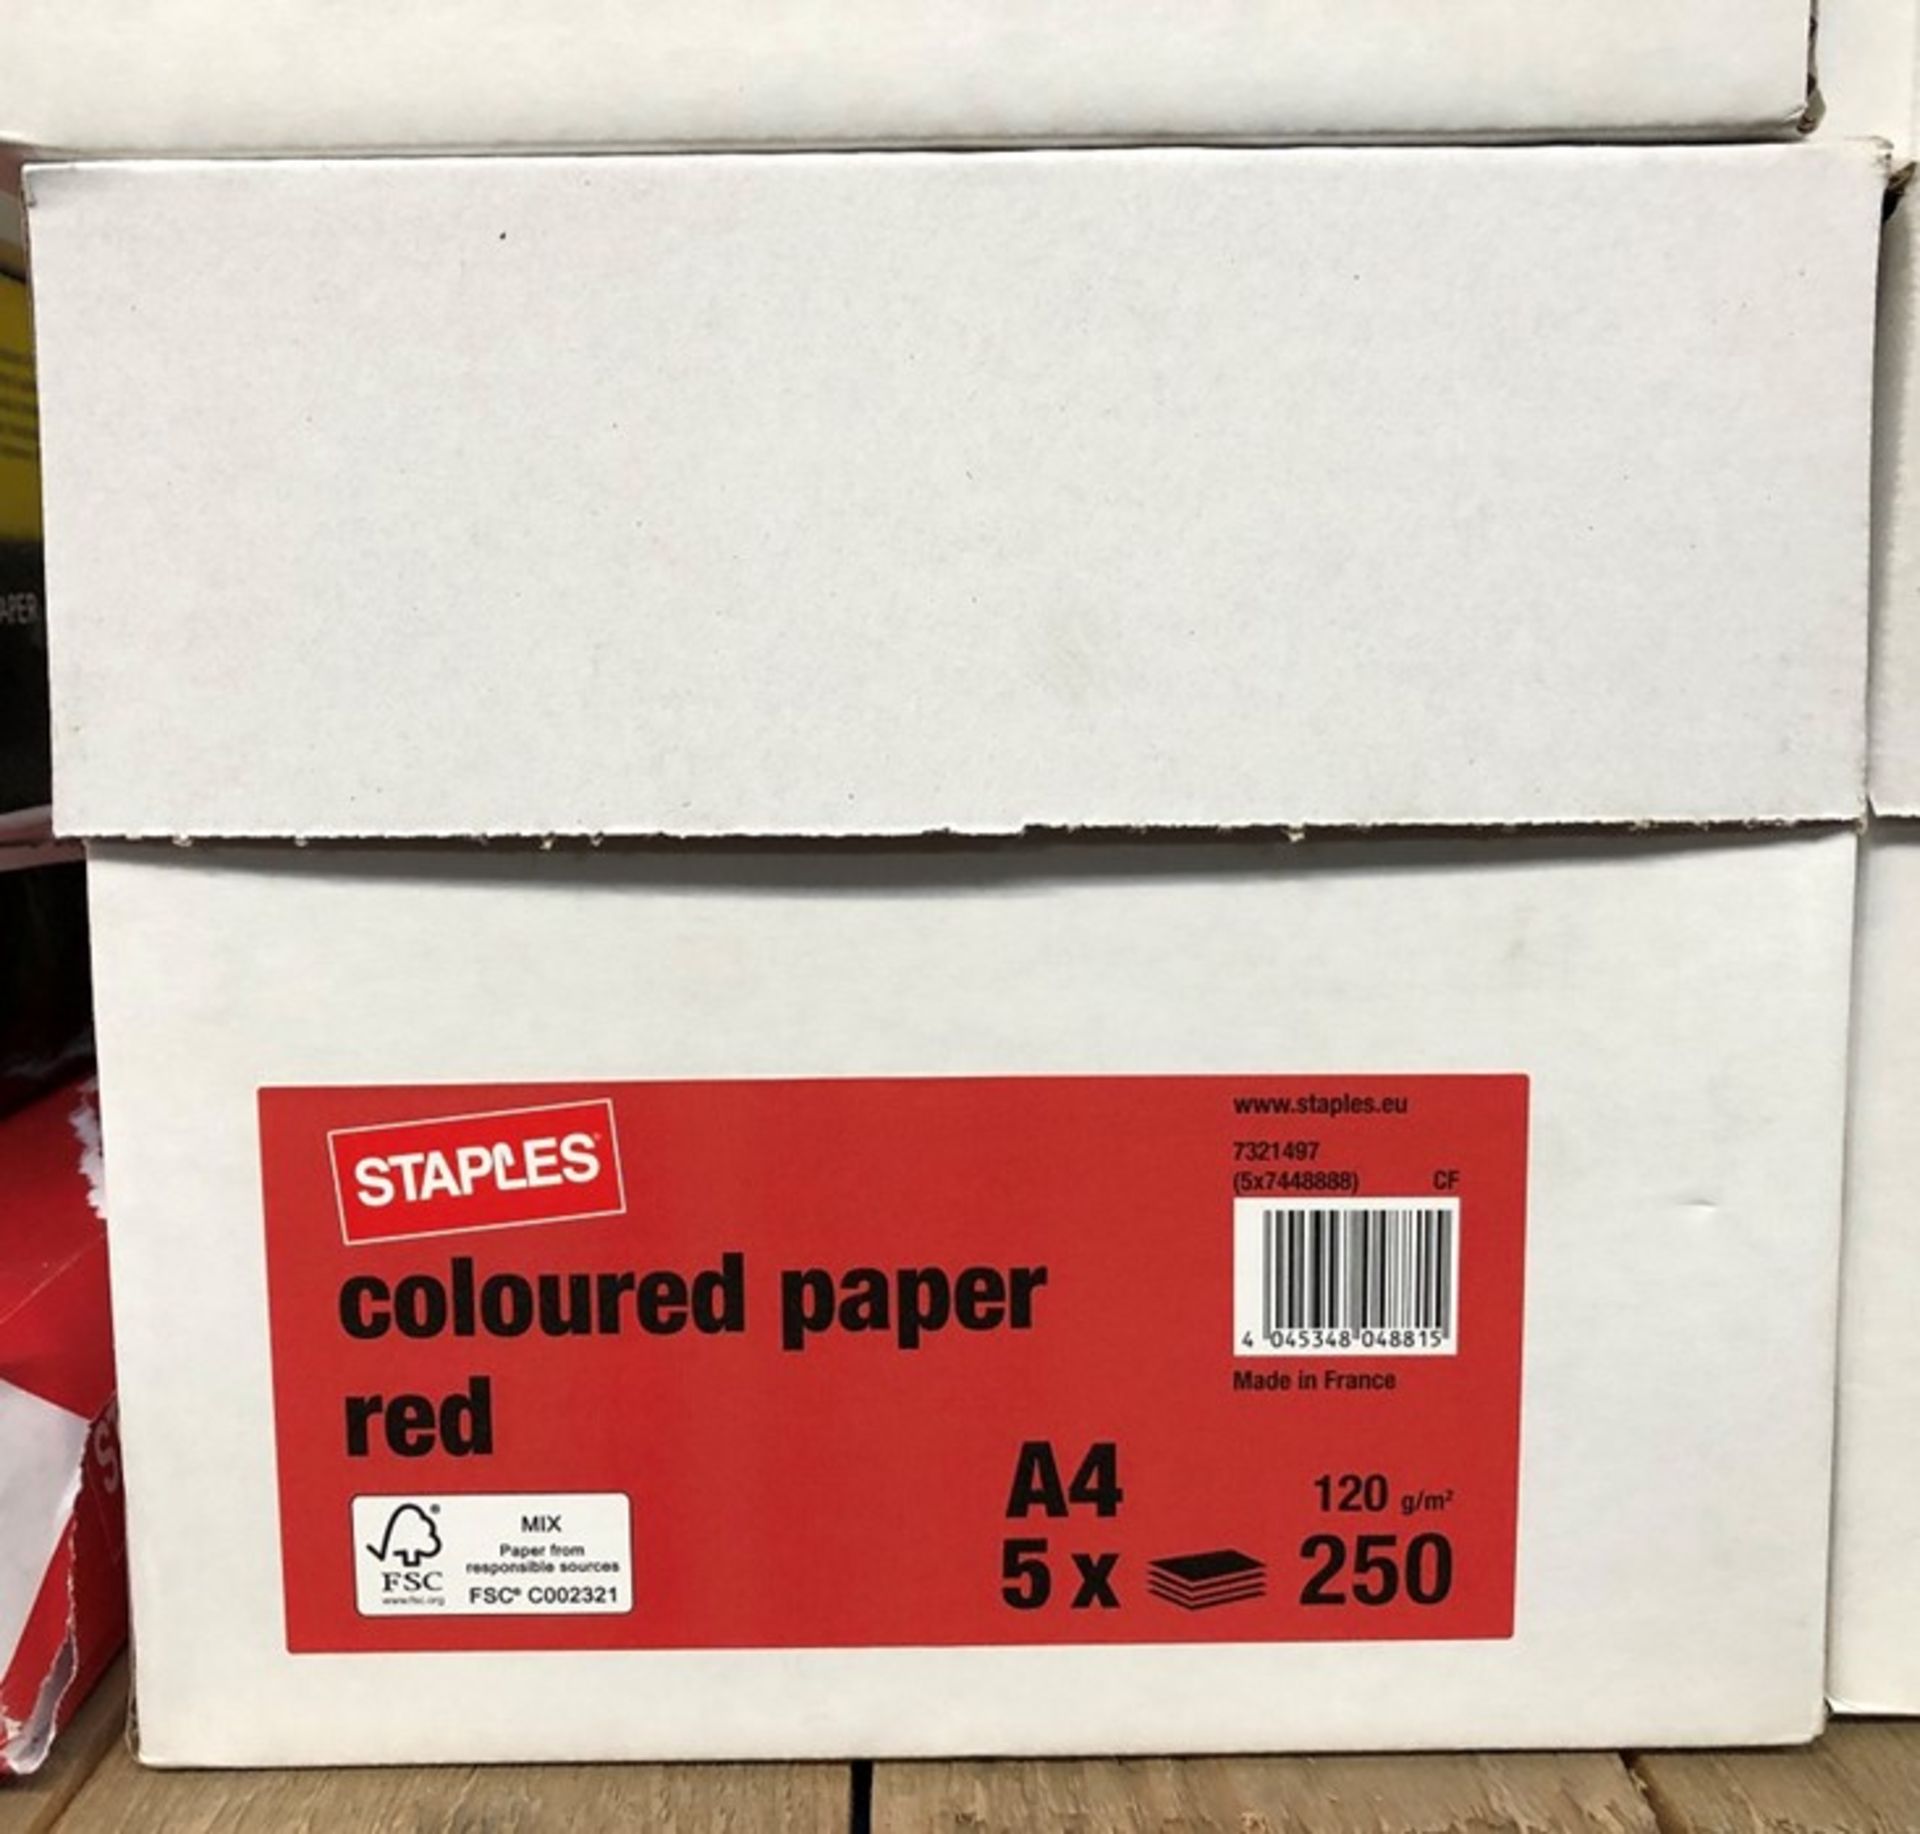 1 LOT TO CONTAIN 3 X BOXES OF STAPLES RED A4 COLOURED PAPER - 1250 SHEETS PER BOX 120 GSM